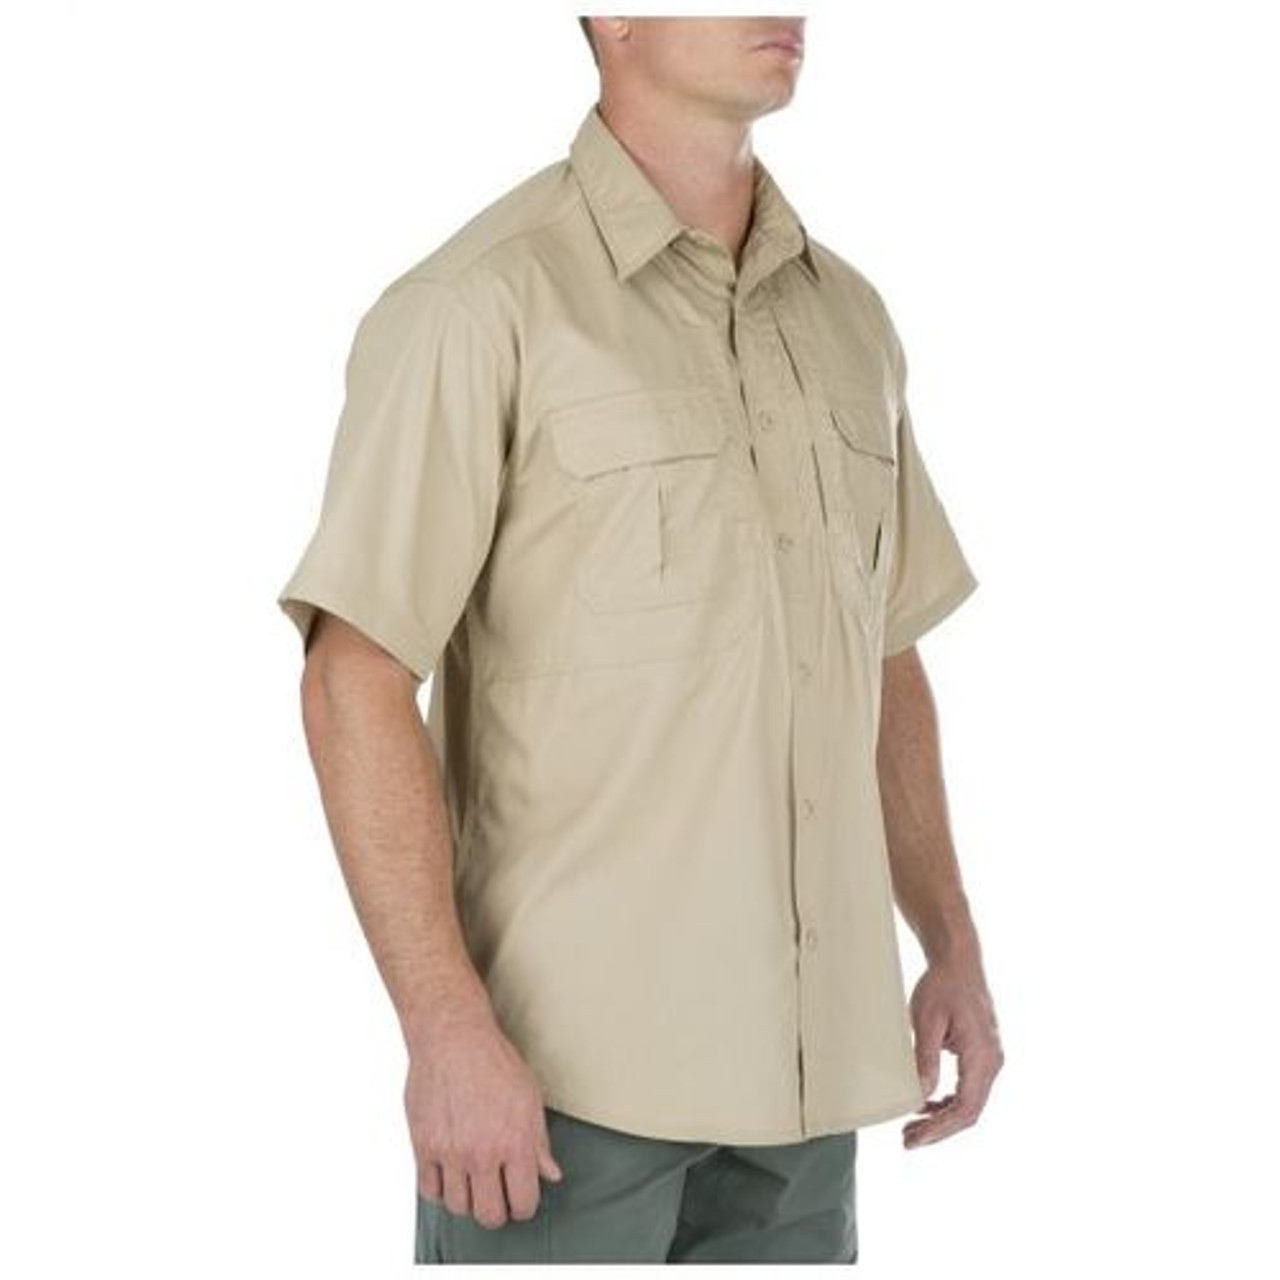 5.11 Tactical 71175 TacLite Pro Short Sleeve Casual Button-Down Tactical Shirt, 2 Chest Pockets, Polyester/Cotton available in Black, TDU Khaki, White, Charcoal Grey, TDU Green, and Dark Navy Blue - Available while supplies last